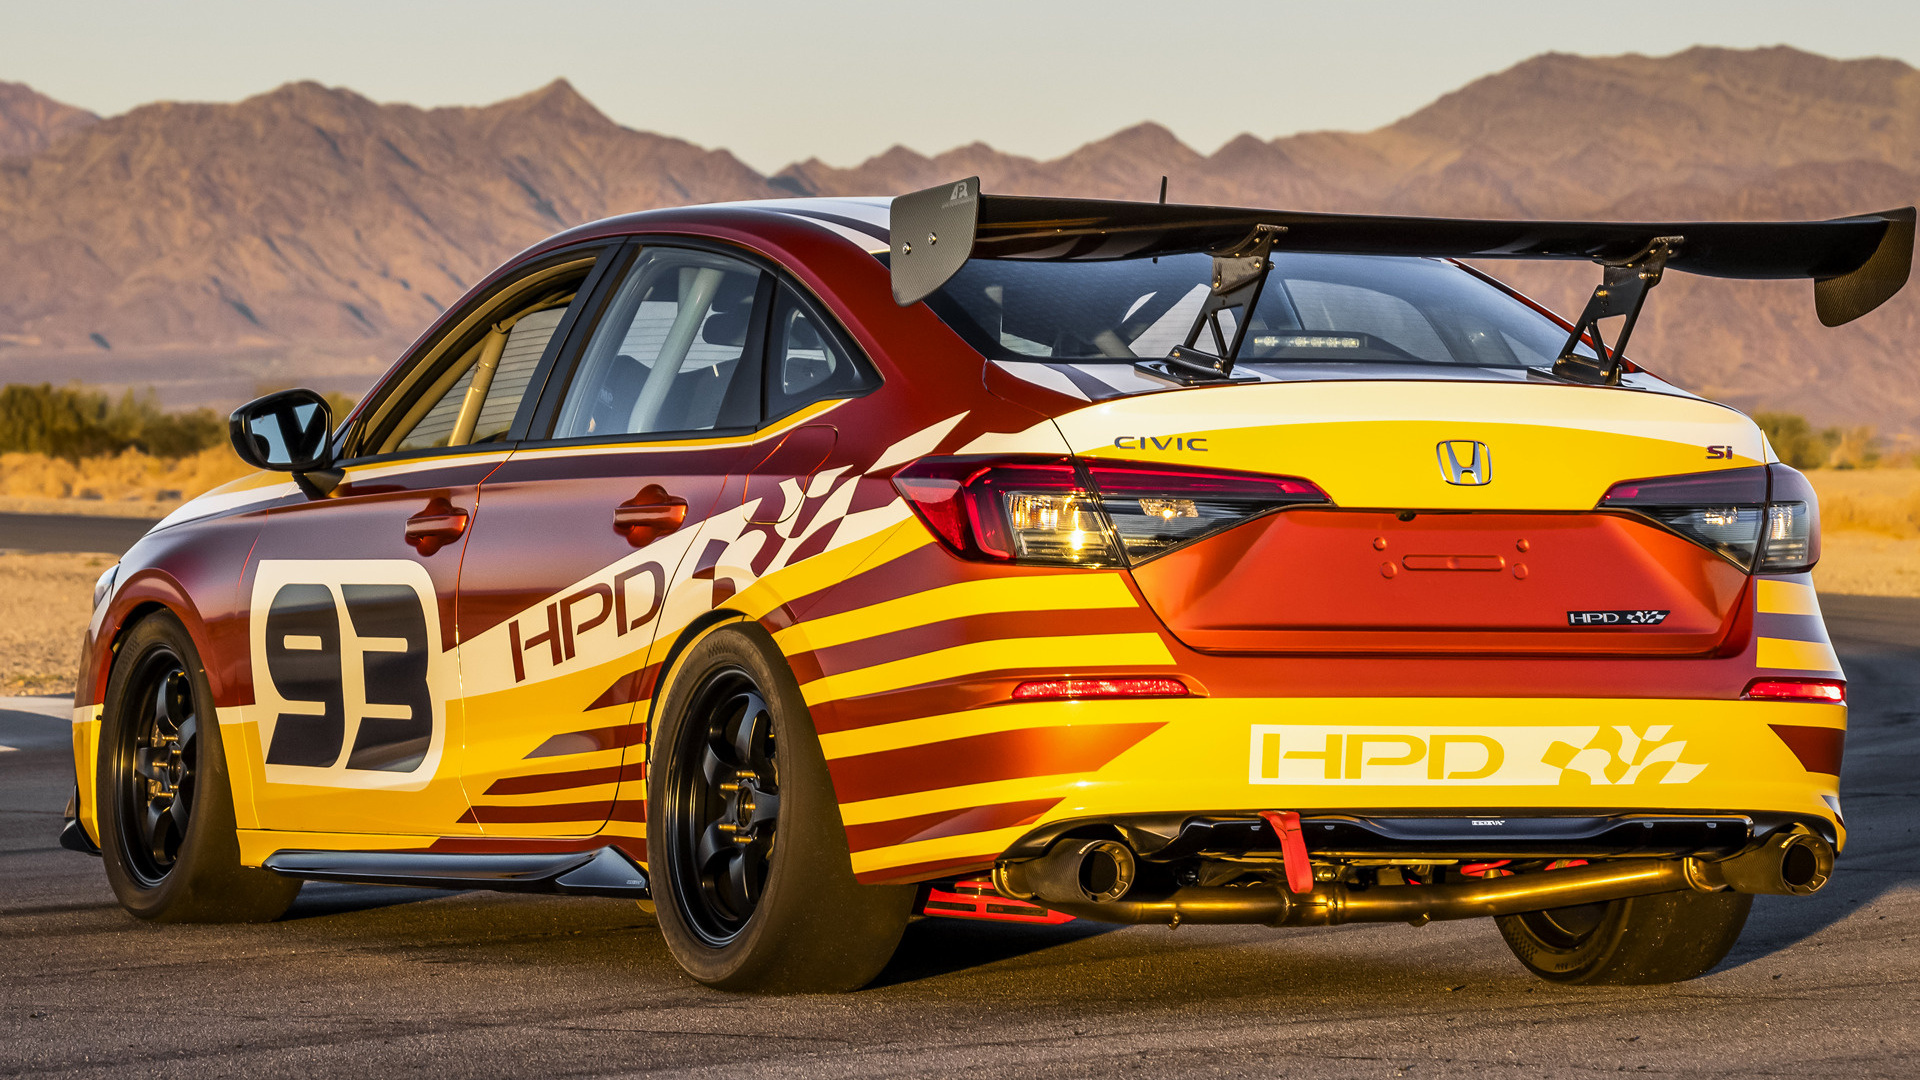 2021 Honda Civic Si Race Car Prototype By Hpd Wallpapers And Hd